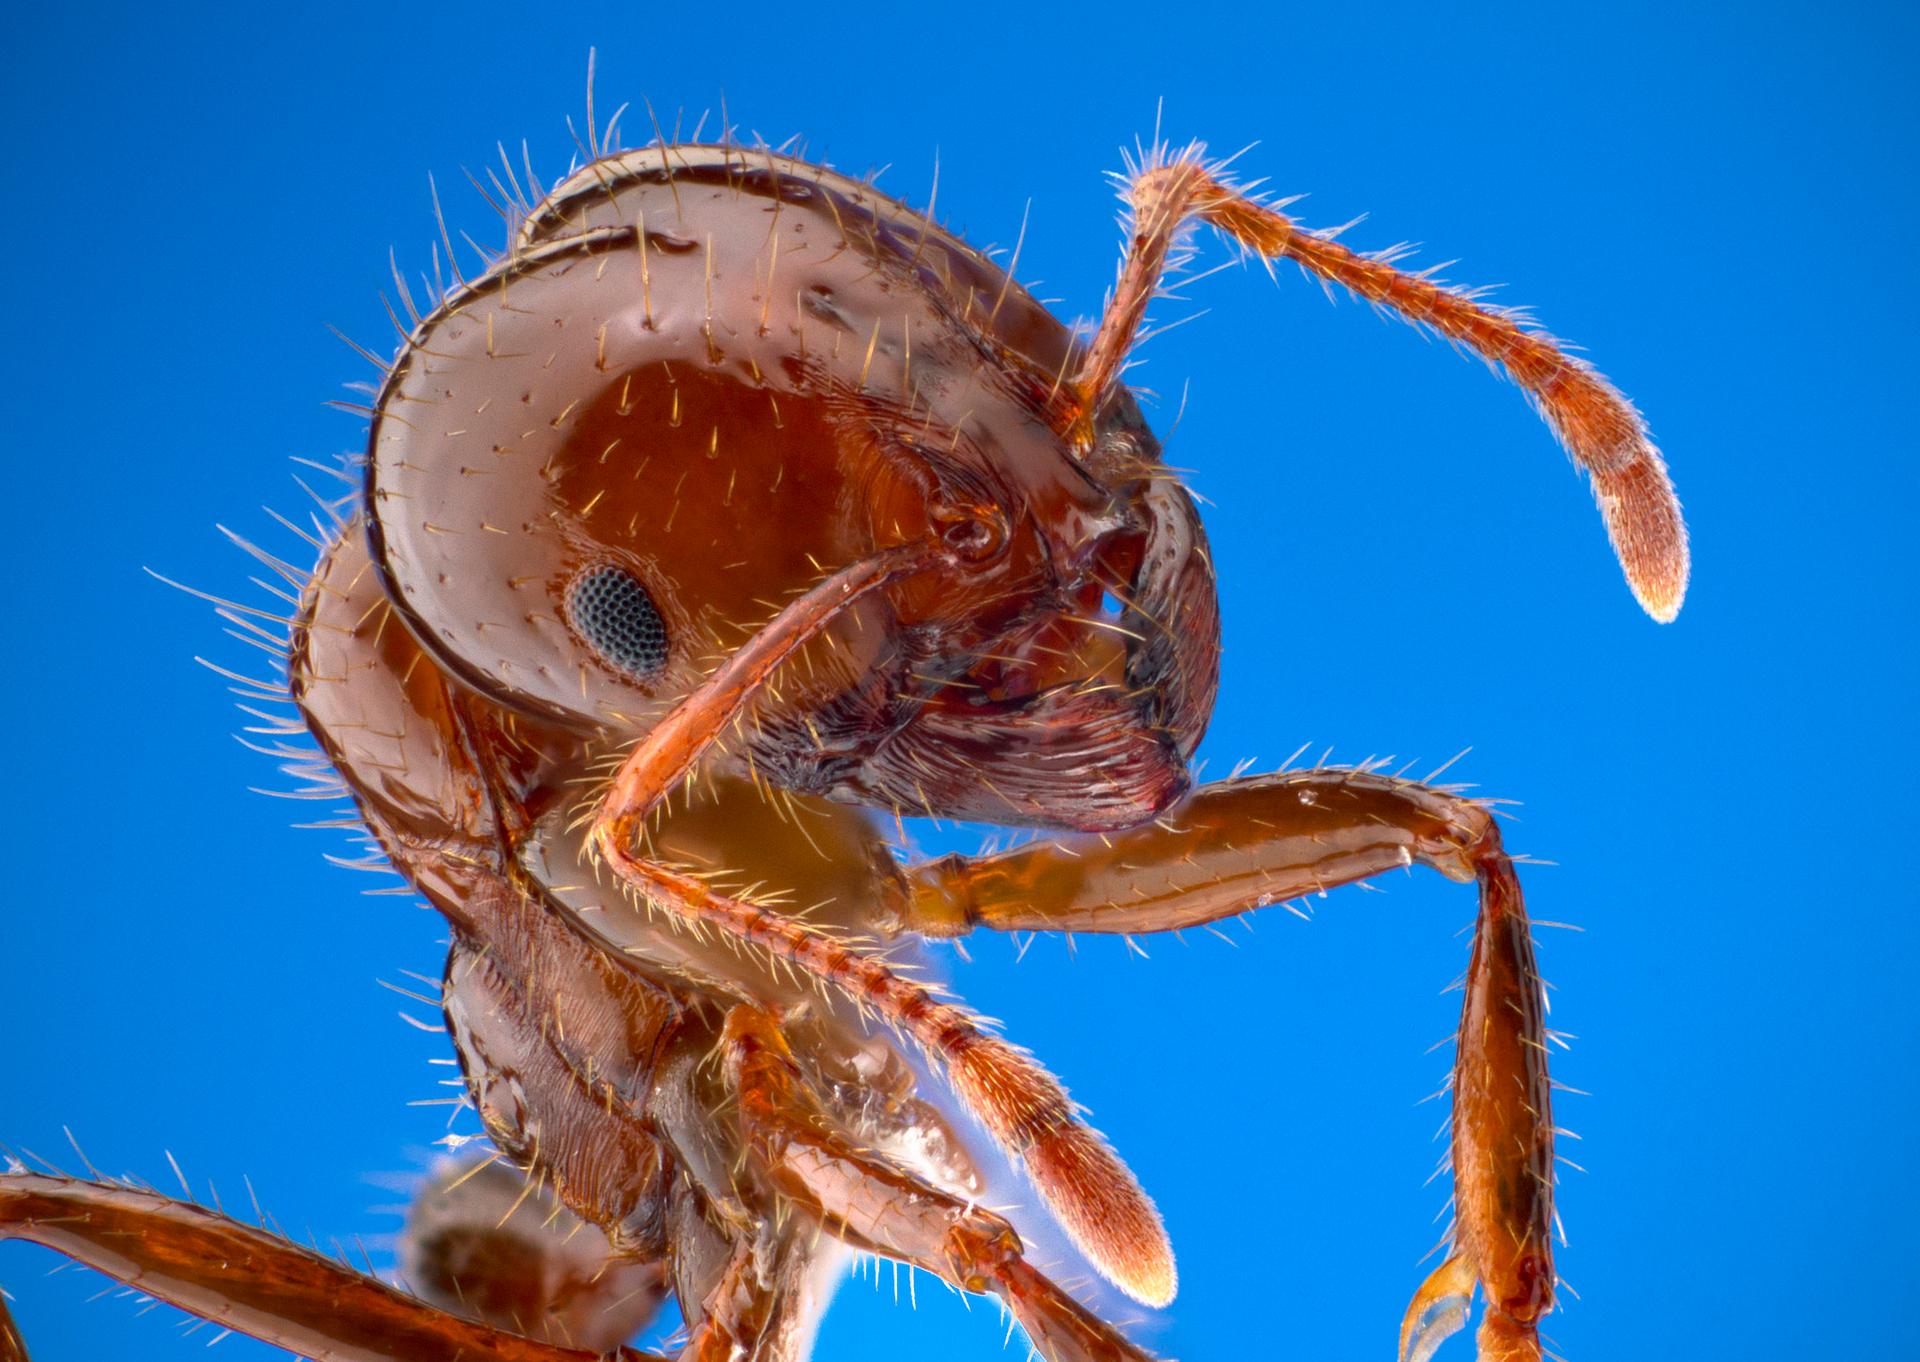 A fire ant.